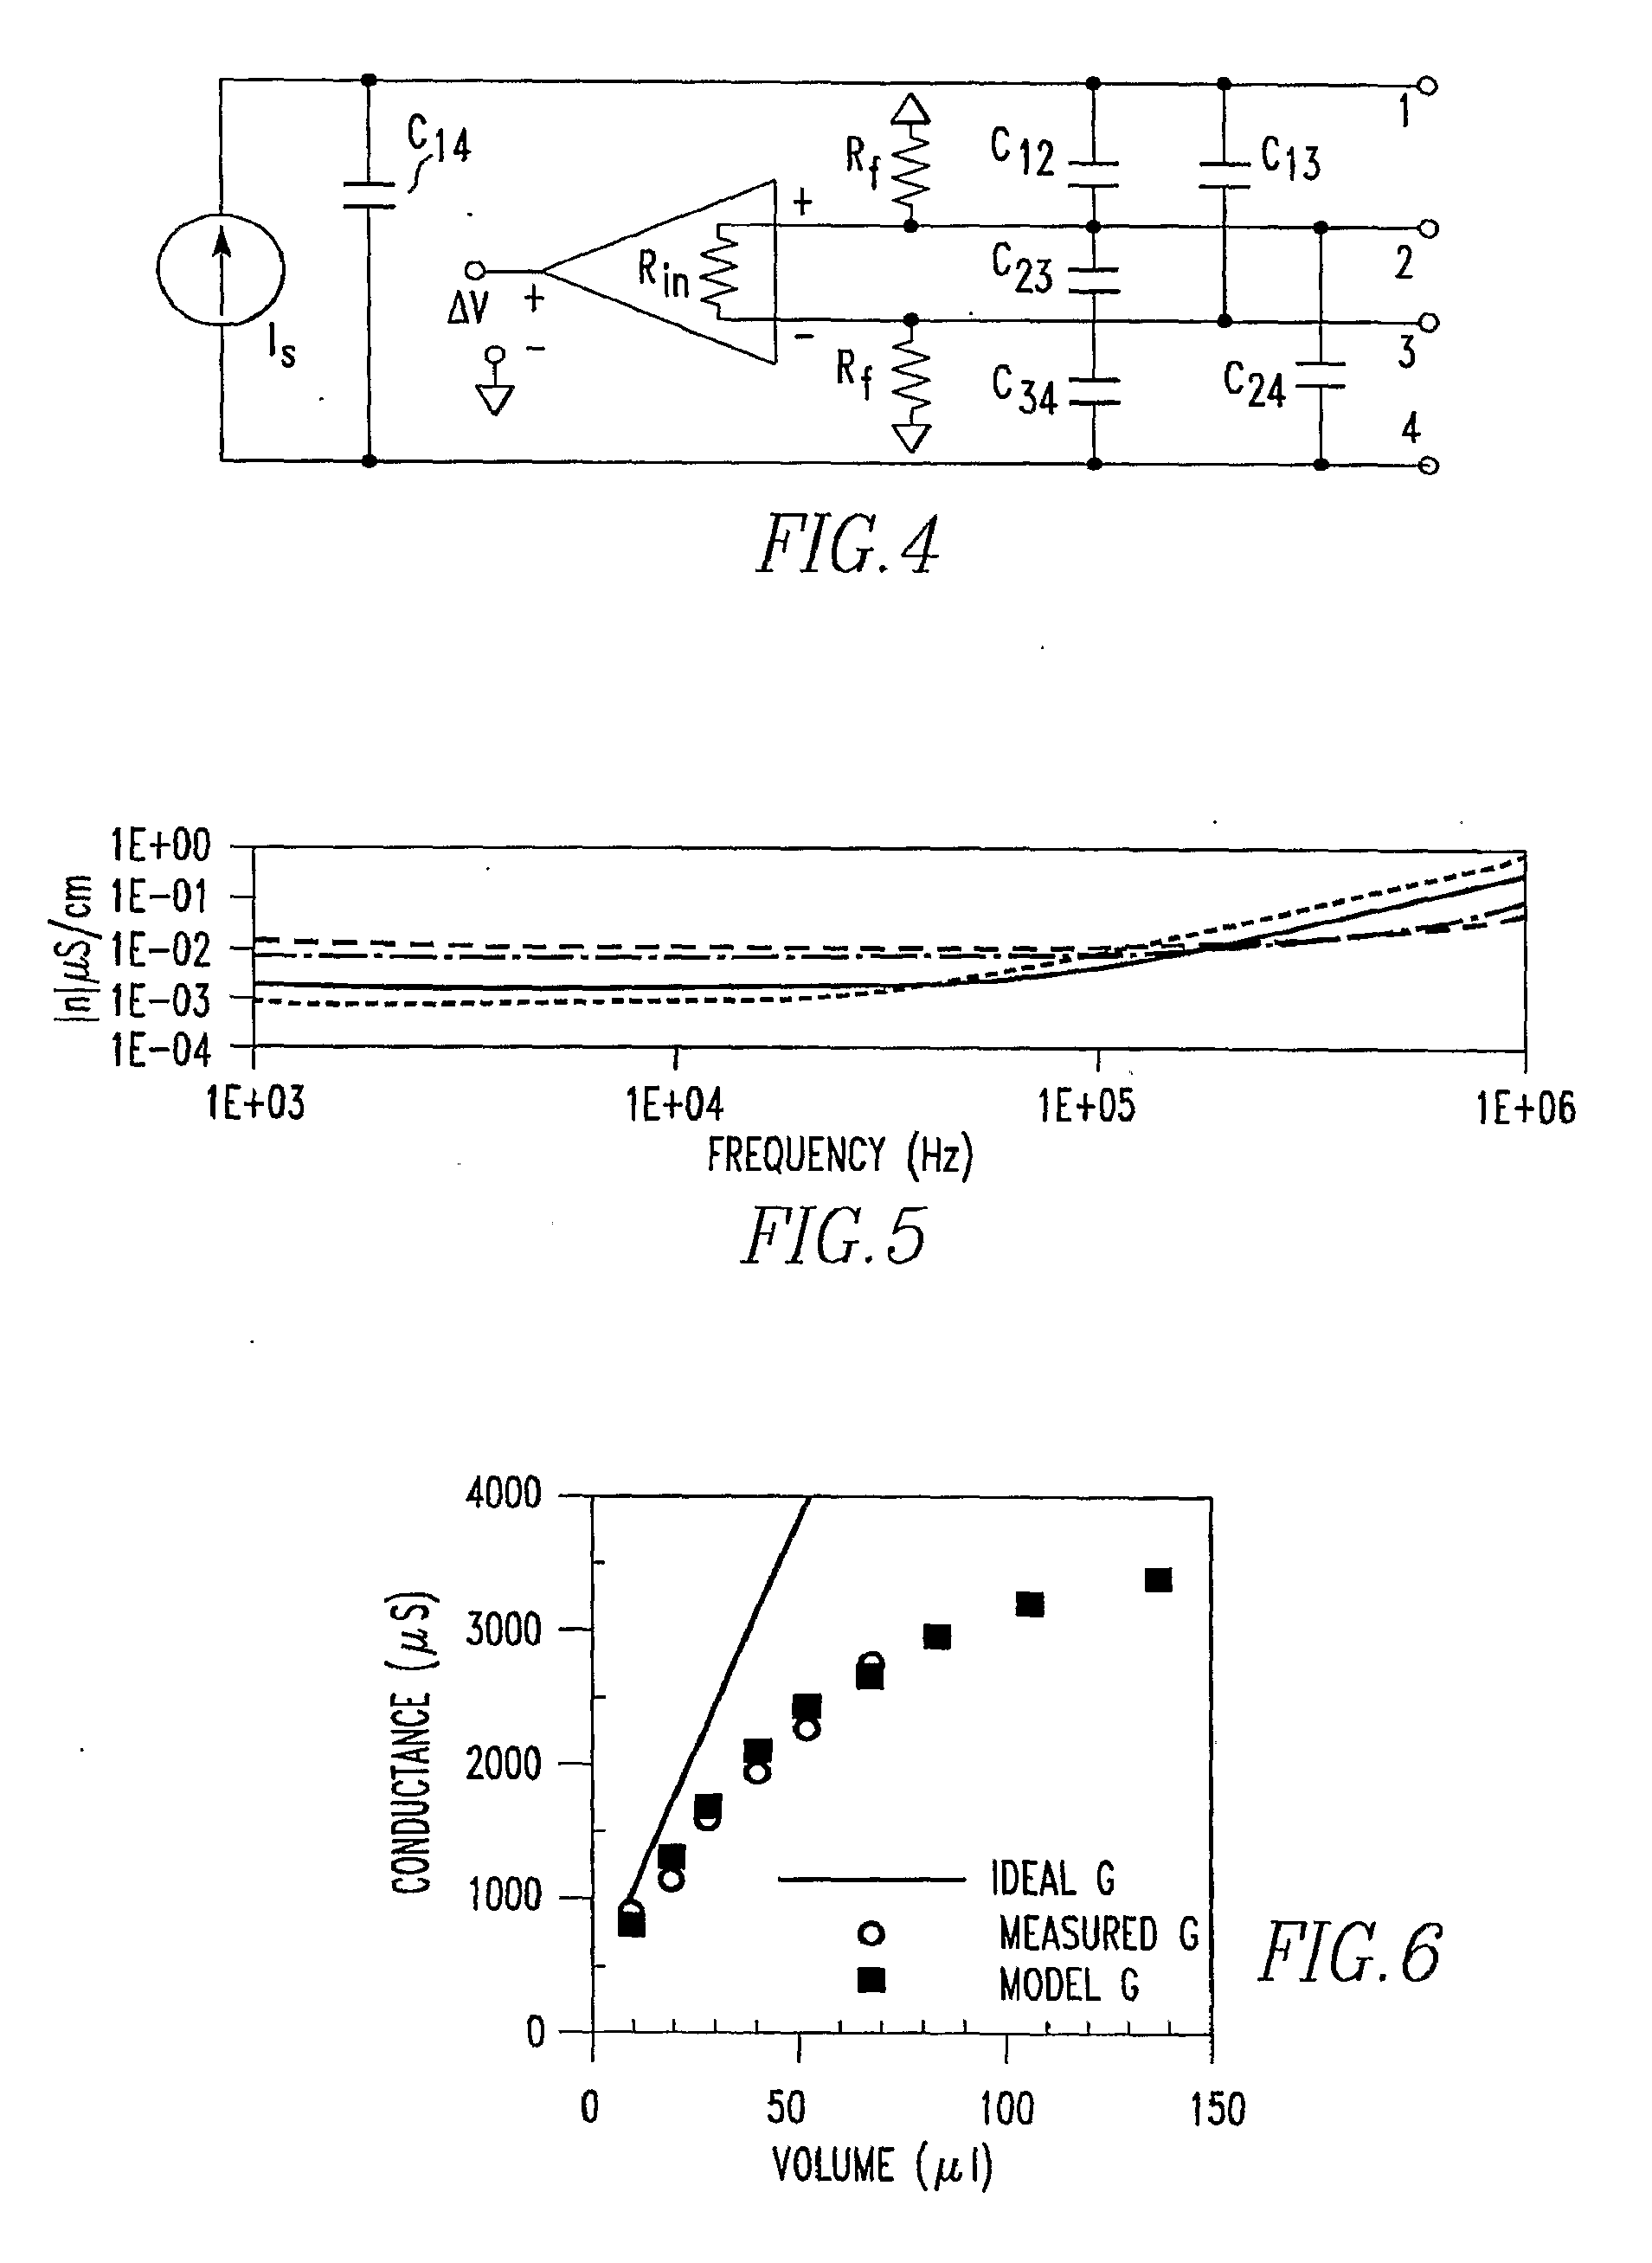 Method and Apparatus for Determining Cardiac Performance in a Patient